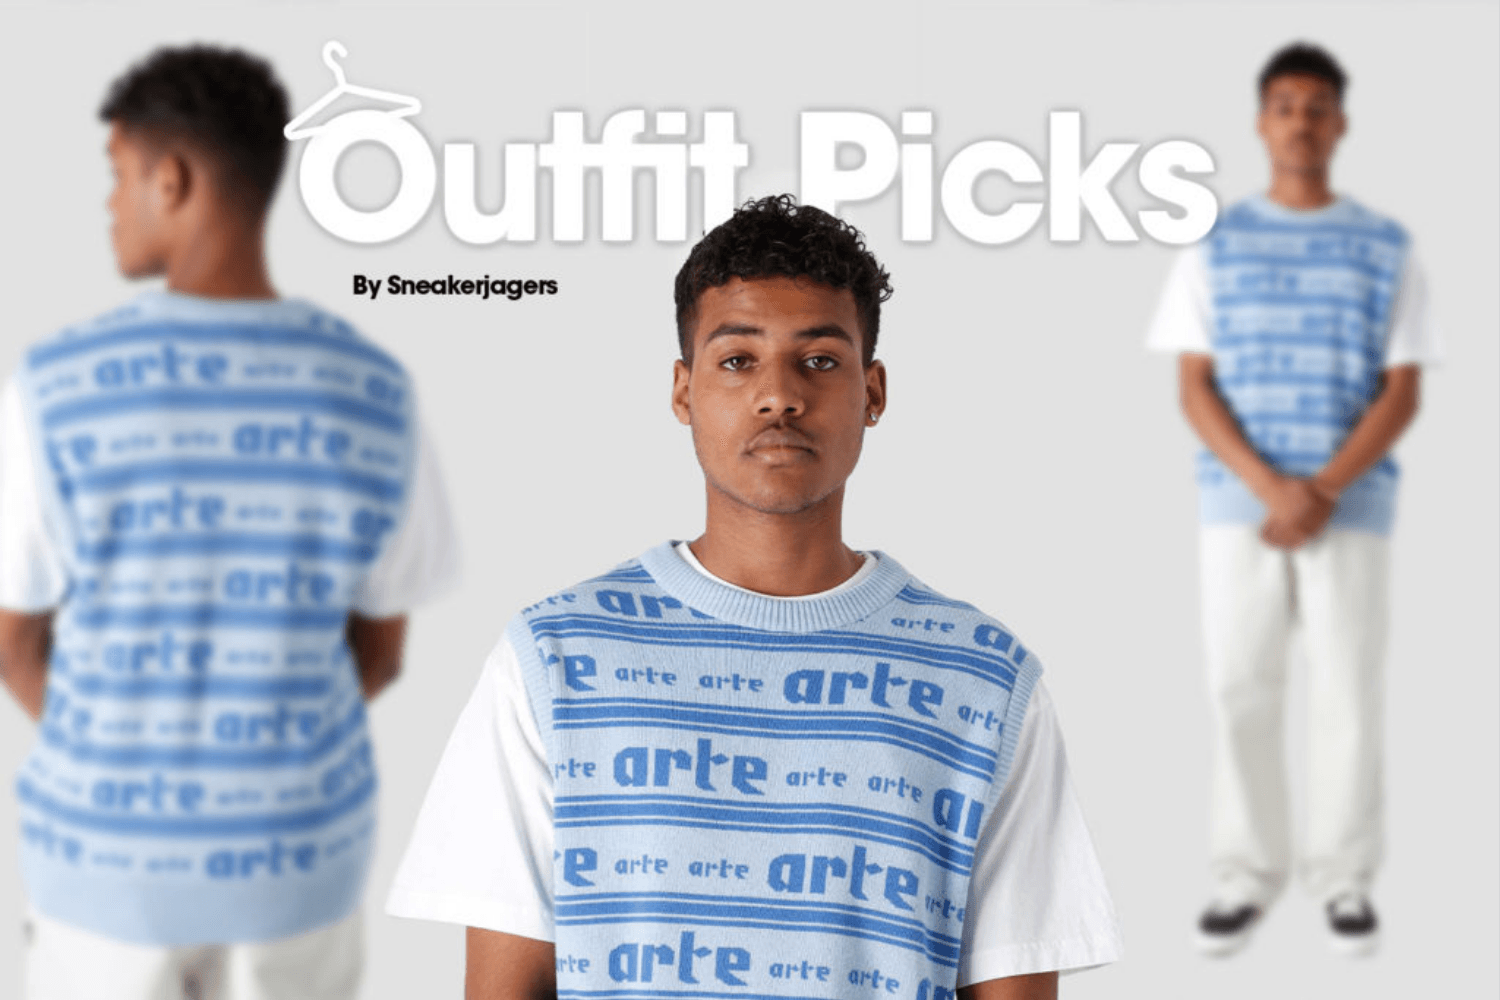 Outfit Picks by Sneakerjagers - Woche 27